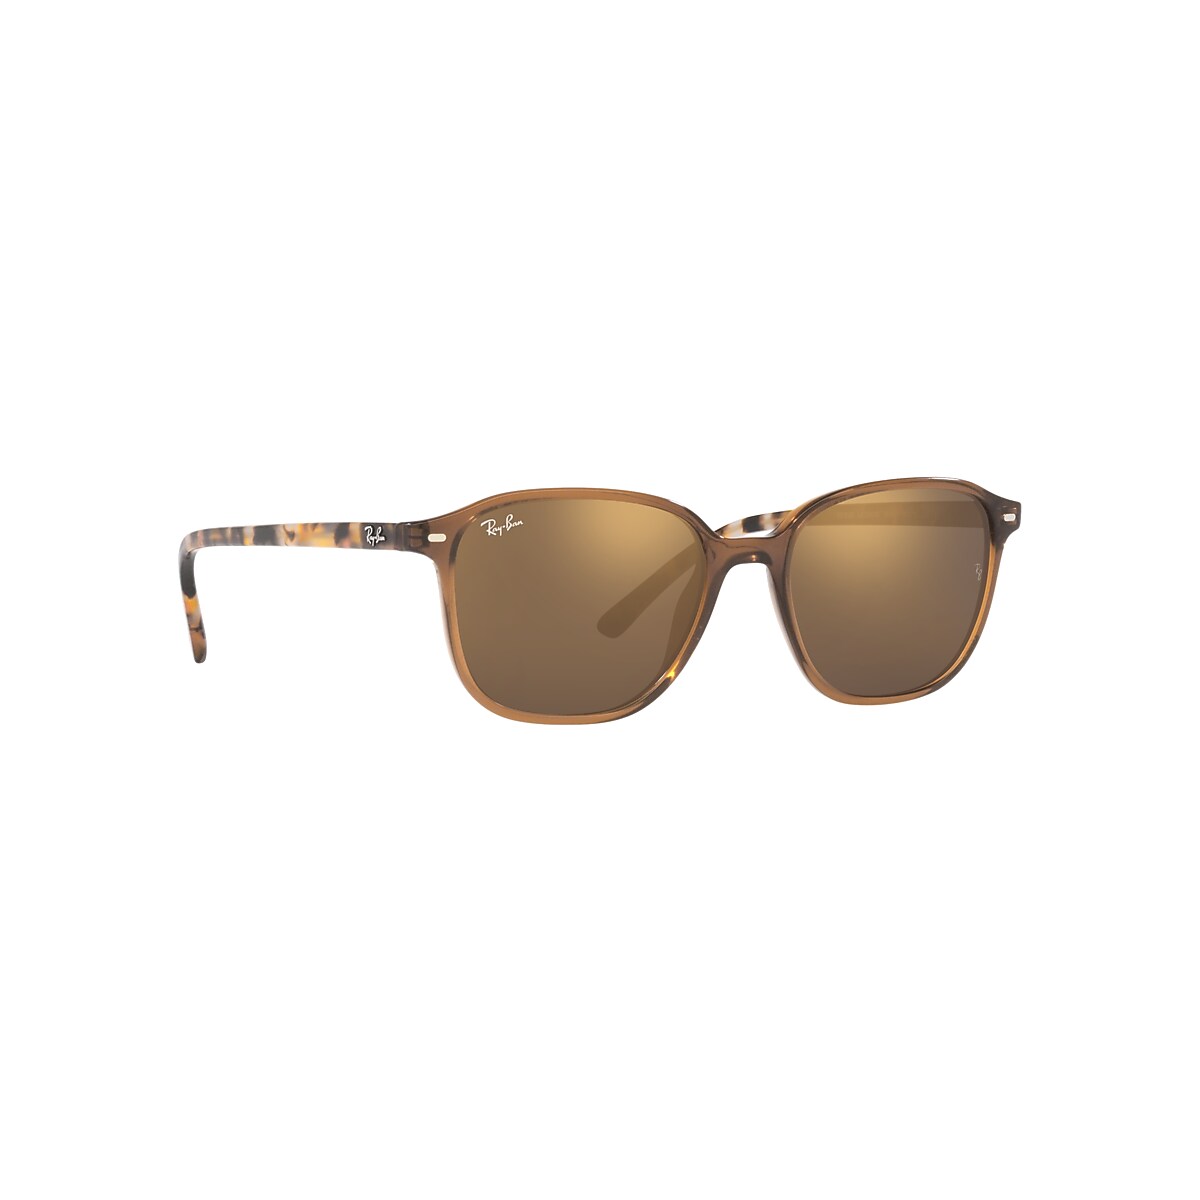 LEONARD Sunglasses in Transparent Brown and Light Brown - RB2193F